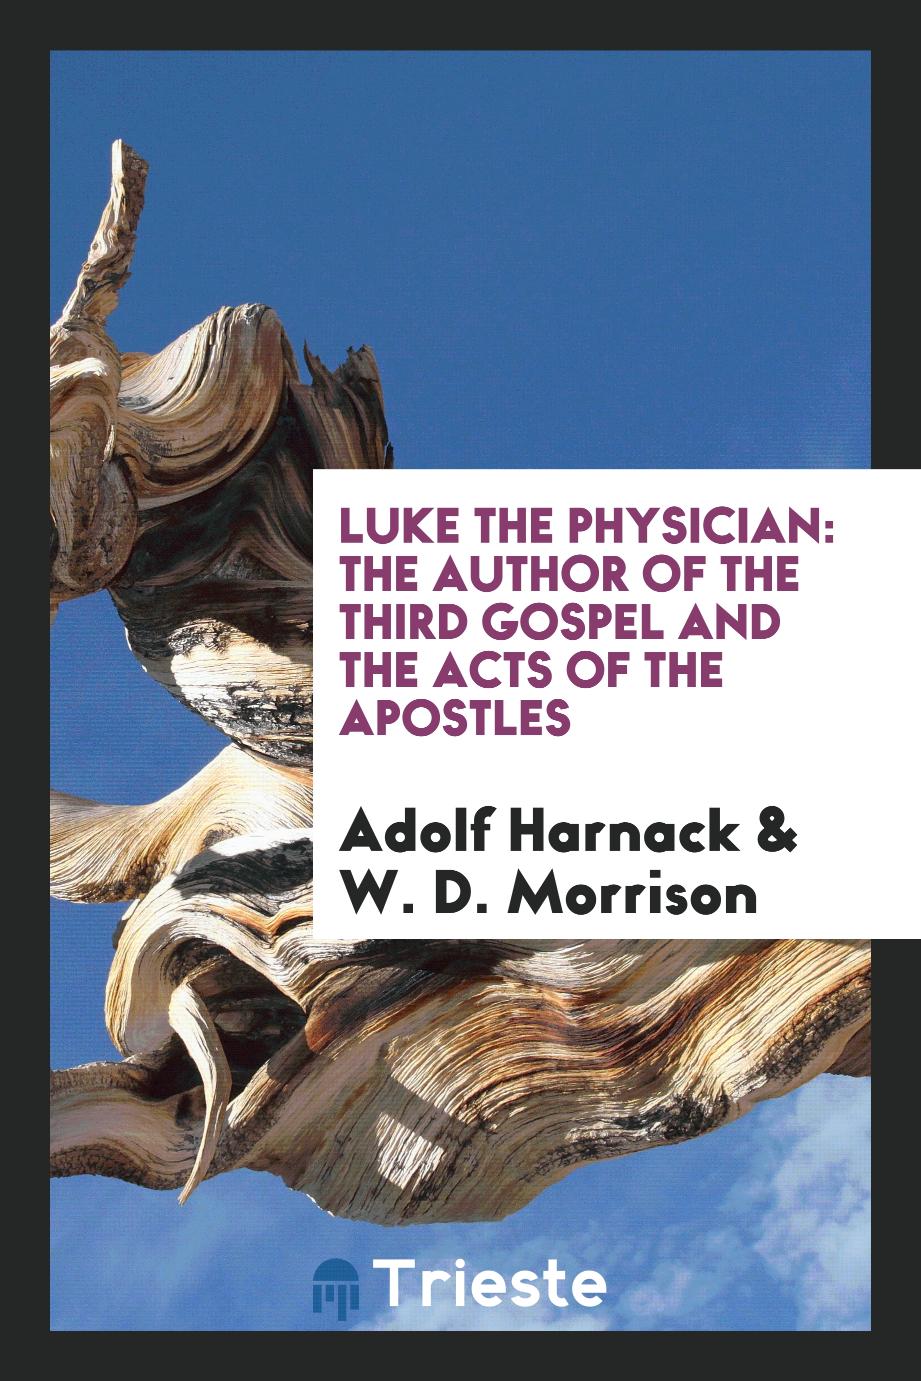 Luke the physician: the author of the Third gospel and the Acts of the Apostles